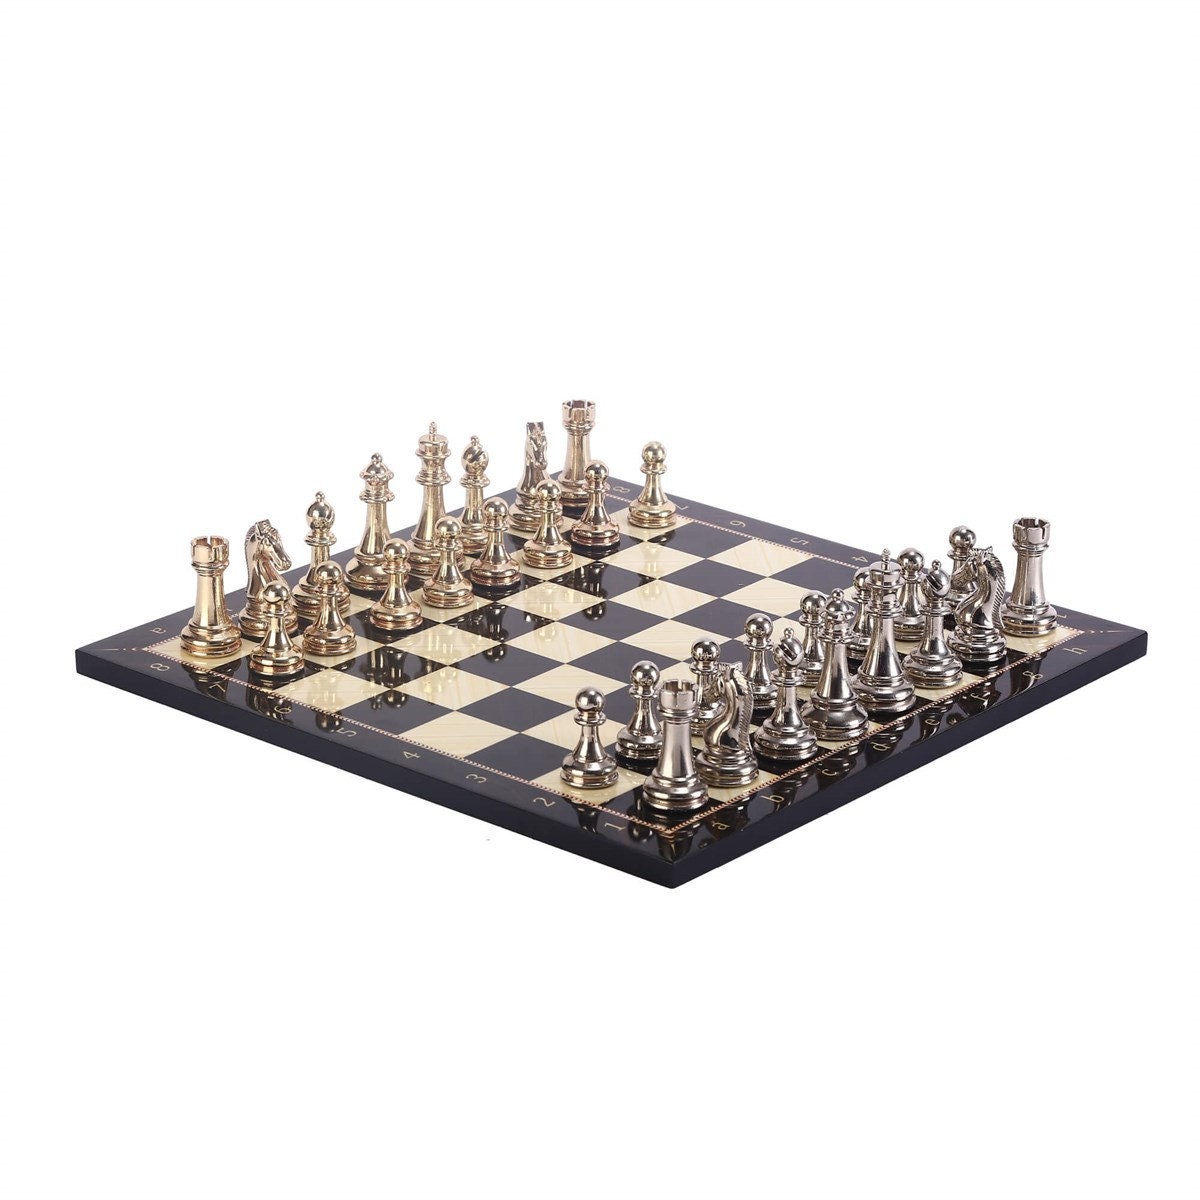  Luxury Chess Set - Antique Walnut Board in Mosaic Art with  Bzyantin Chess Pieces - 10 - Gift Item : Toys & Games